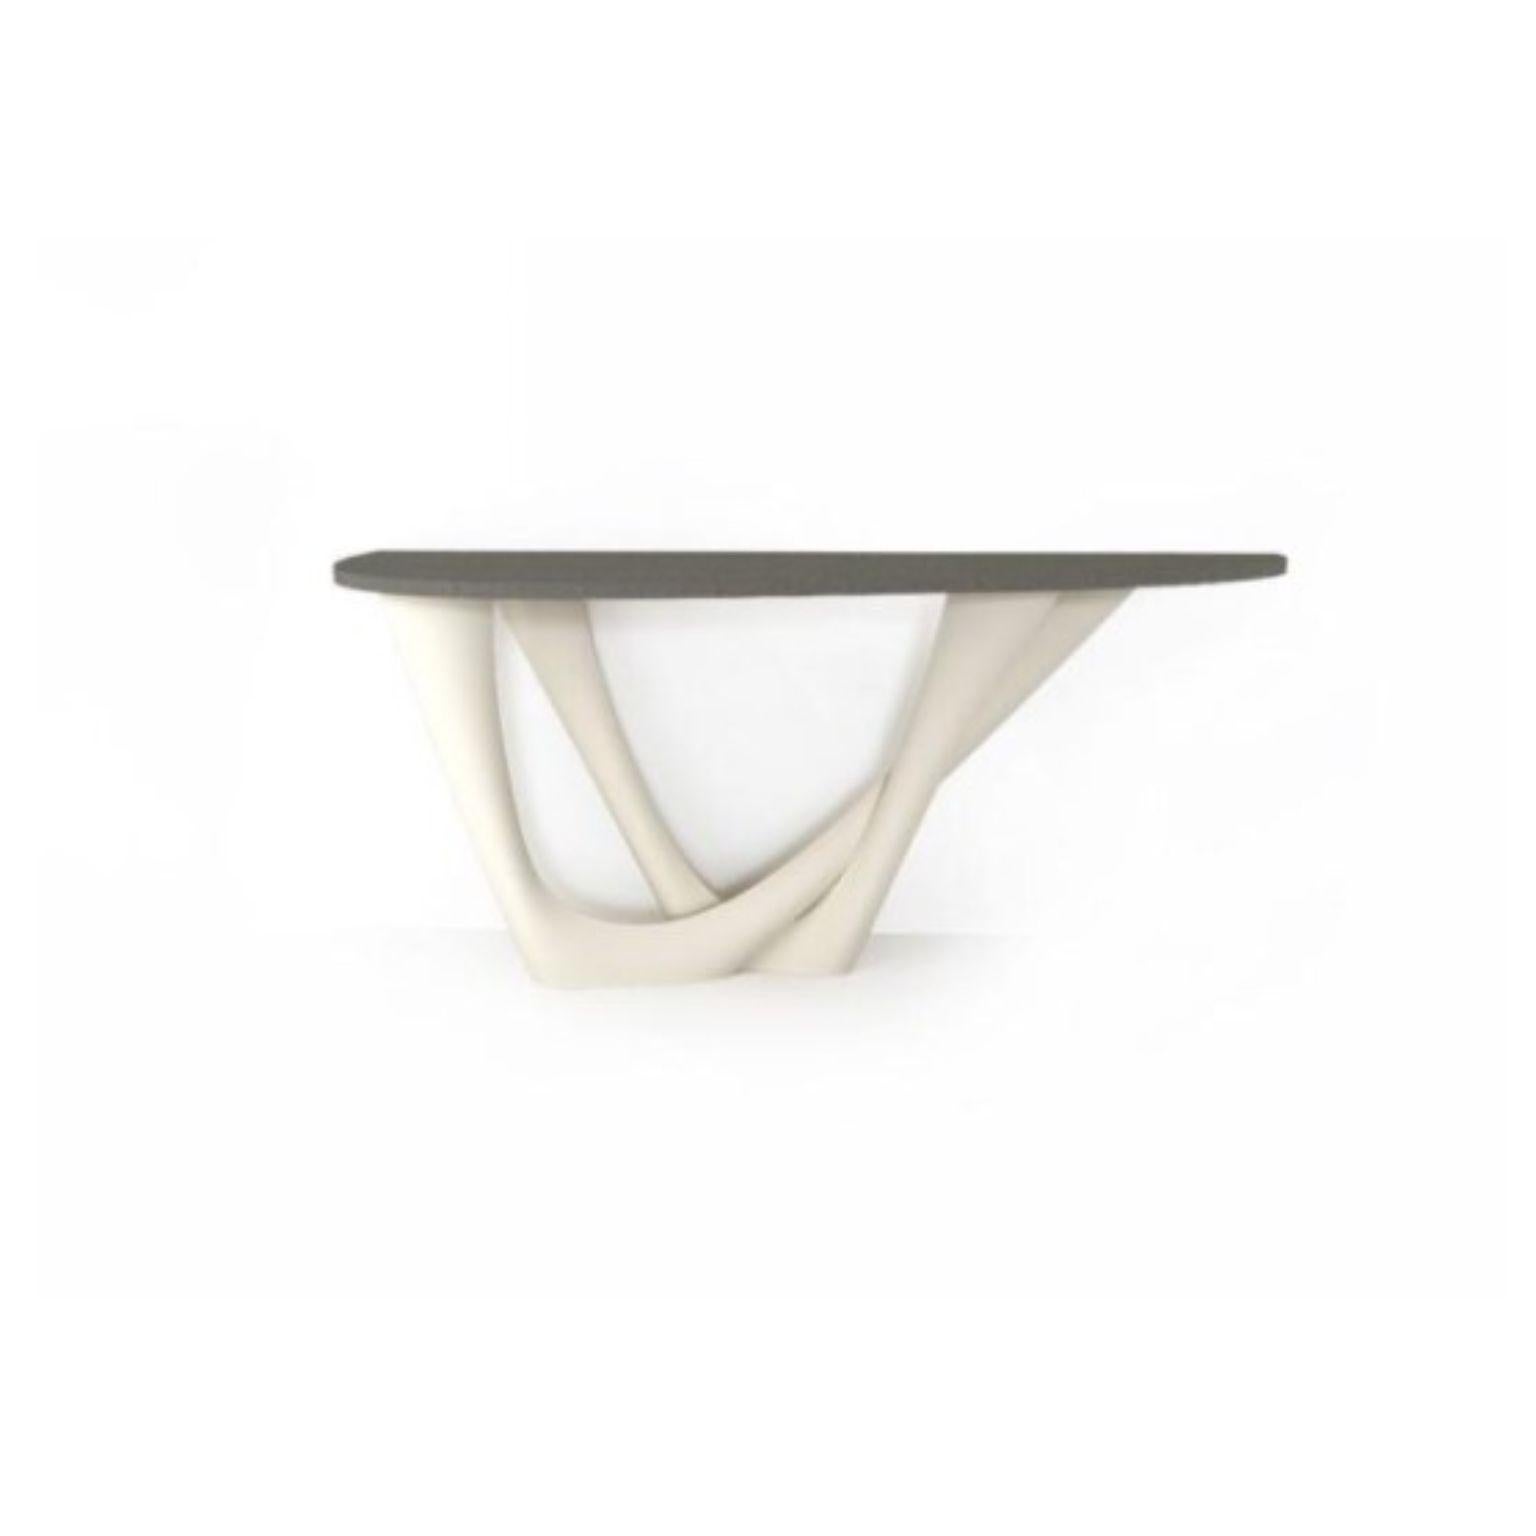 White Matt G-console duo concrete top and steel base by Zieta
Dimensions: D 56 x W 168 x H 75 cm 
Material: Carbon steel, concrete.
Also available in different colors and dimensions.

G-Console is another bionic object in our collection. Created for